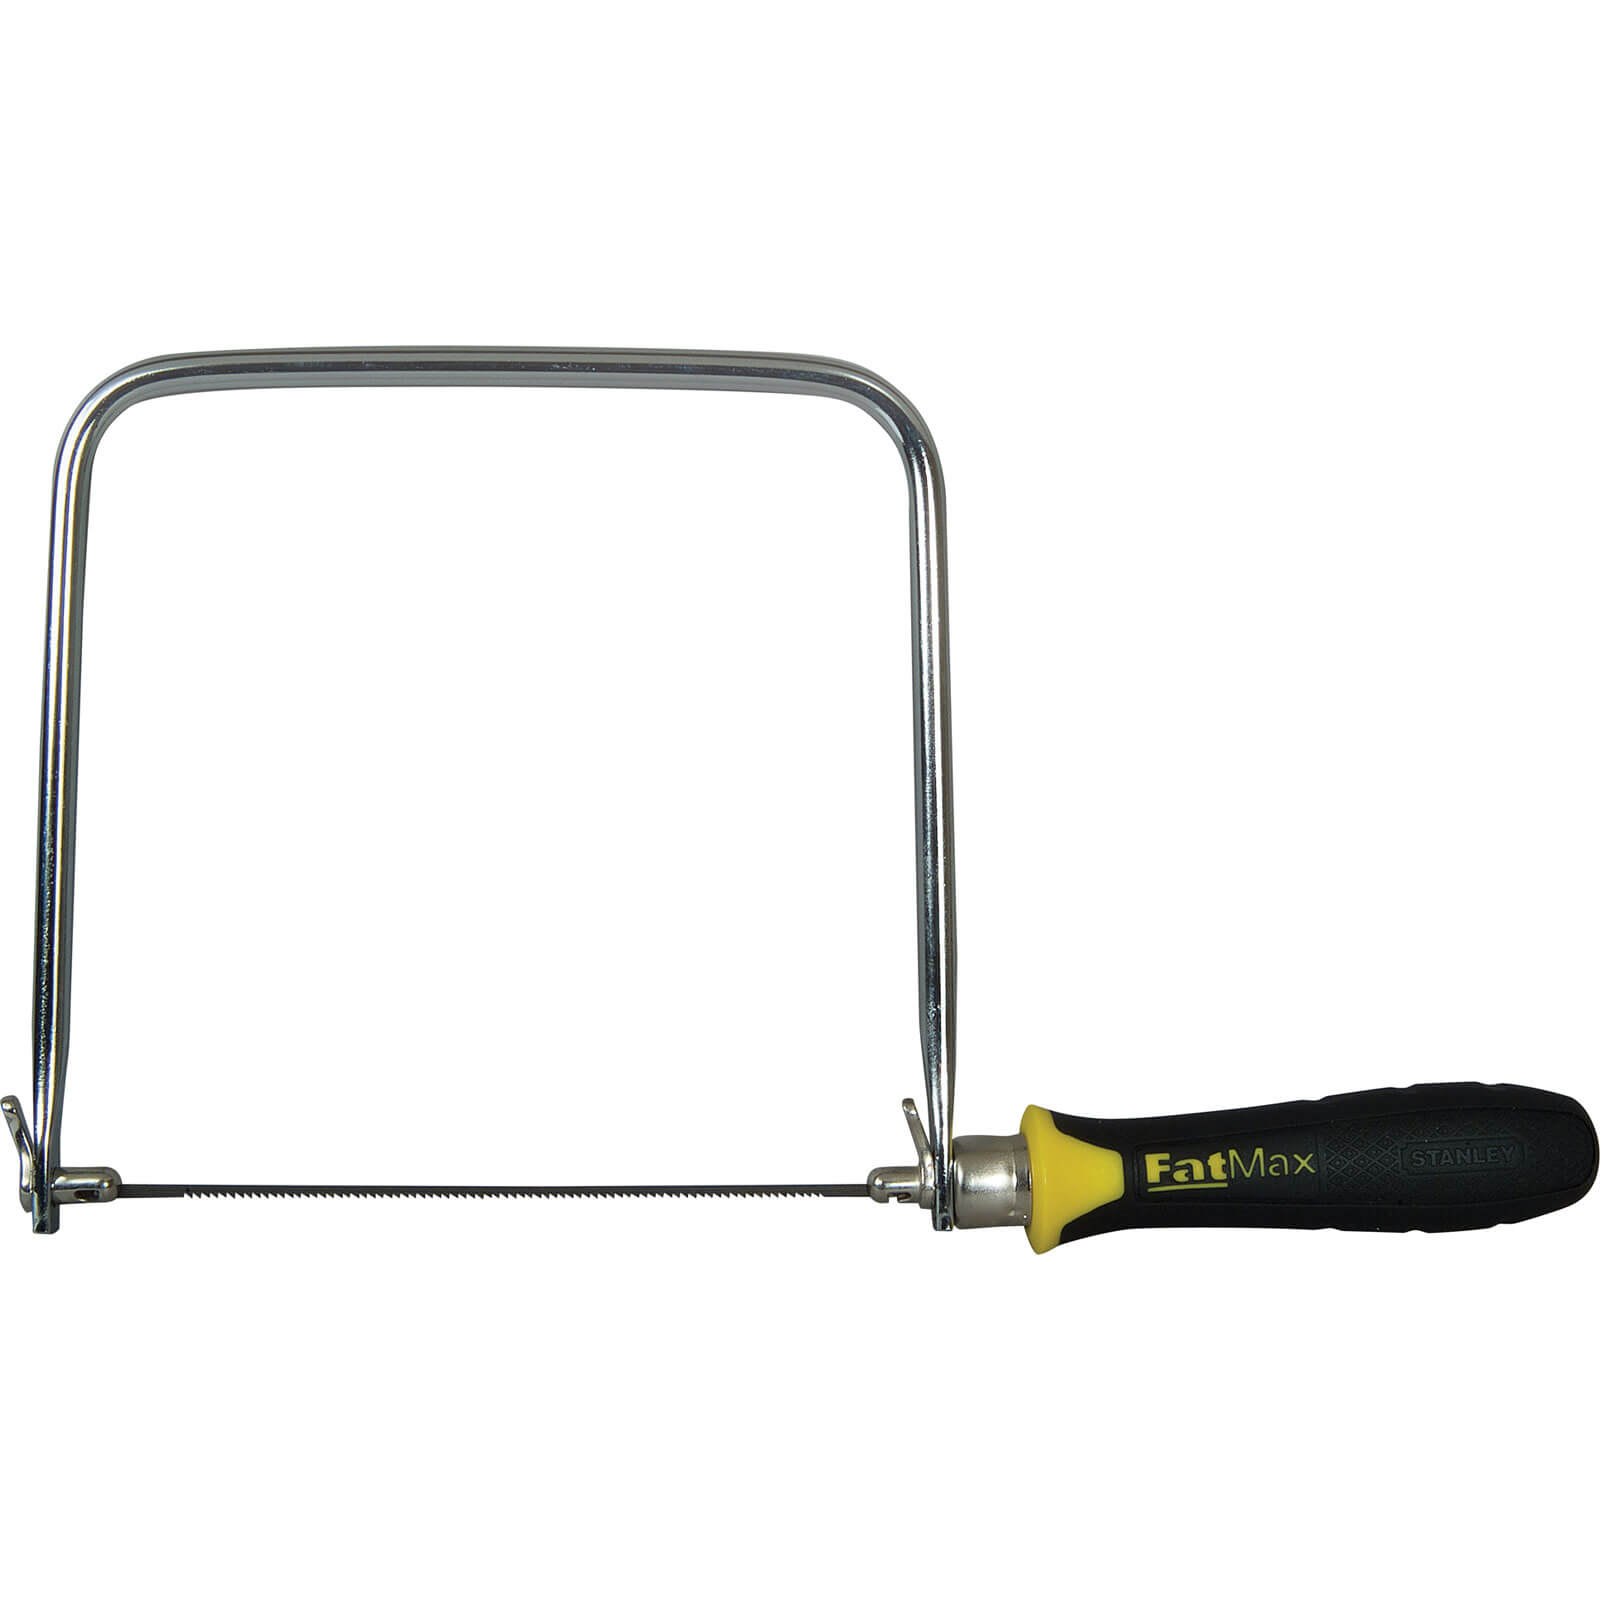 Photo of Stanley Fatmax Coping Saw